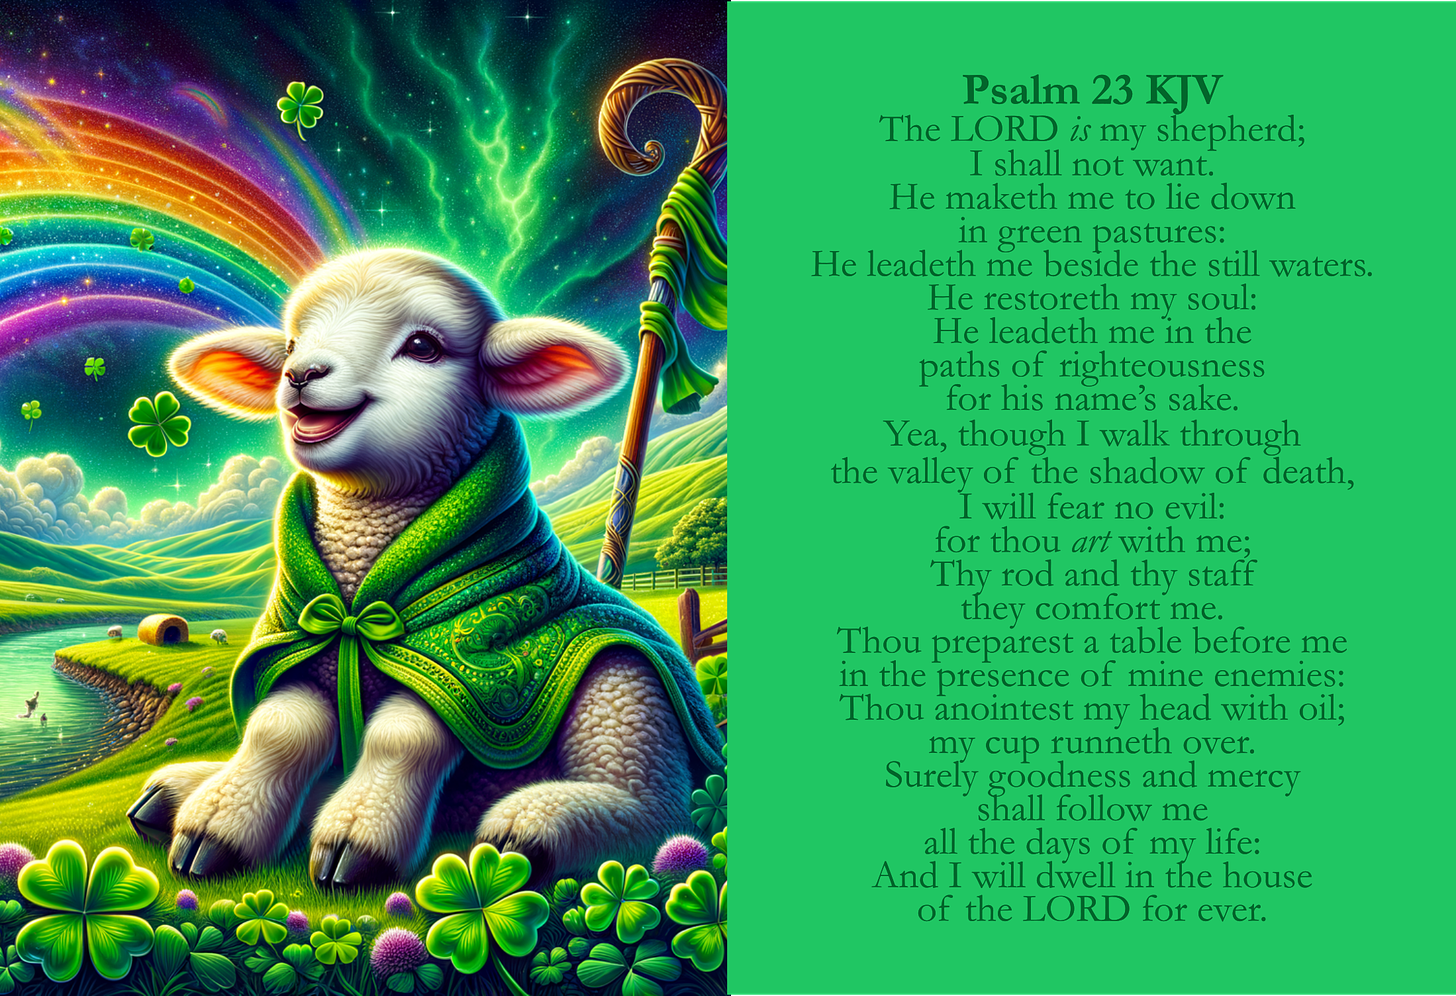 This image is a vibrant and colorful illustration divided into two distinct sections. On the left side, there's a detailed and whimsical portrayal of a landscape with a lamb as the focal point. The lamb is depicted in an anthropomorphic manner, sitting on its haunches with a joyful expression on its face. It has white, fluffy wool and is wearing a green scarf with a bow tied at the front. The scarf has intricate patterns and a texture resembling embroidery.  The lamb is placed on a grassy knoll with various shades of green, dotted with clover leaves and flowers, primarily in the foreground. The background showcases a rolling, idyllic landscape with hills, a clear blue river meandering through the valley, hay bales, and a few trees. Above the landscape, the sky is a tapestry of colors, with aurora-like streams in green, purple, and blue, as well as a rainbow arching across. There are also several shooting stars and a wooden staff with a curved top to the left of the lamb, adorned with similar green and golden patterns as the scarf.  On the right side of the image is a block of text, set against a deep teal background. It's the text of Psalm 23 from the King James Version (KJV) of the Bible, written in a formal and elegant font in a lighter teal color, which provides good contrast and readability. The text is arranged in a justified alignment and maintains a balanced layout, with appropriate spacing between lines and paragraphs for clarity.